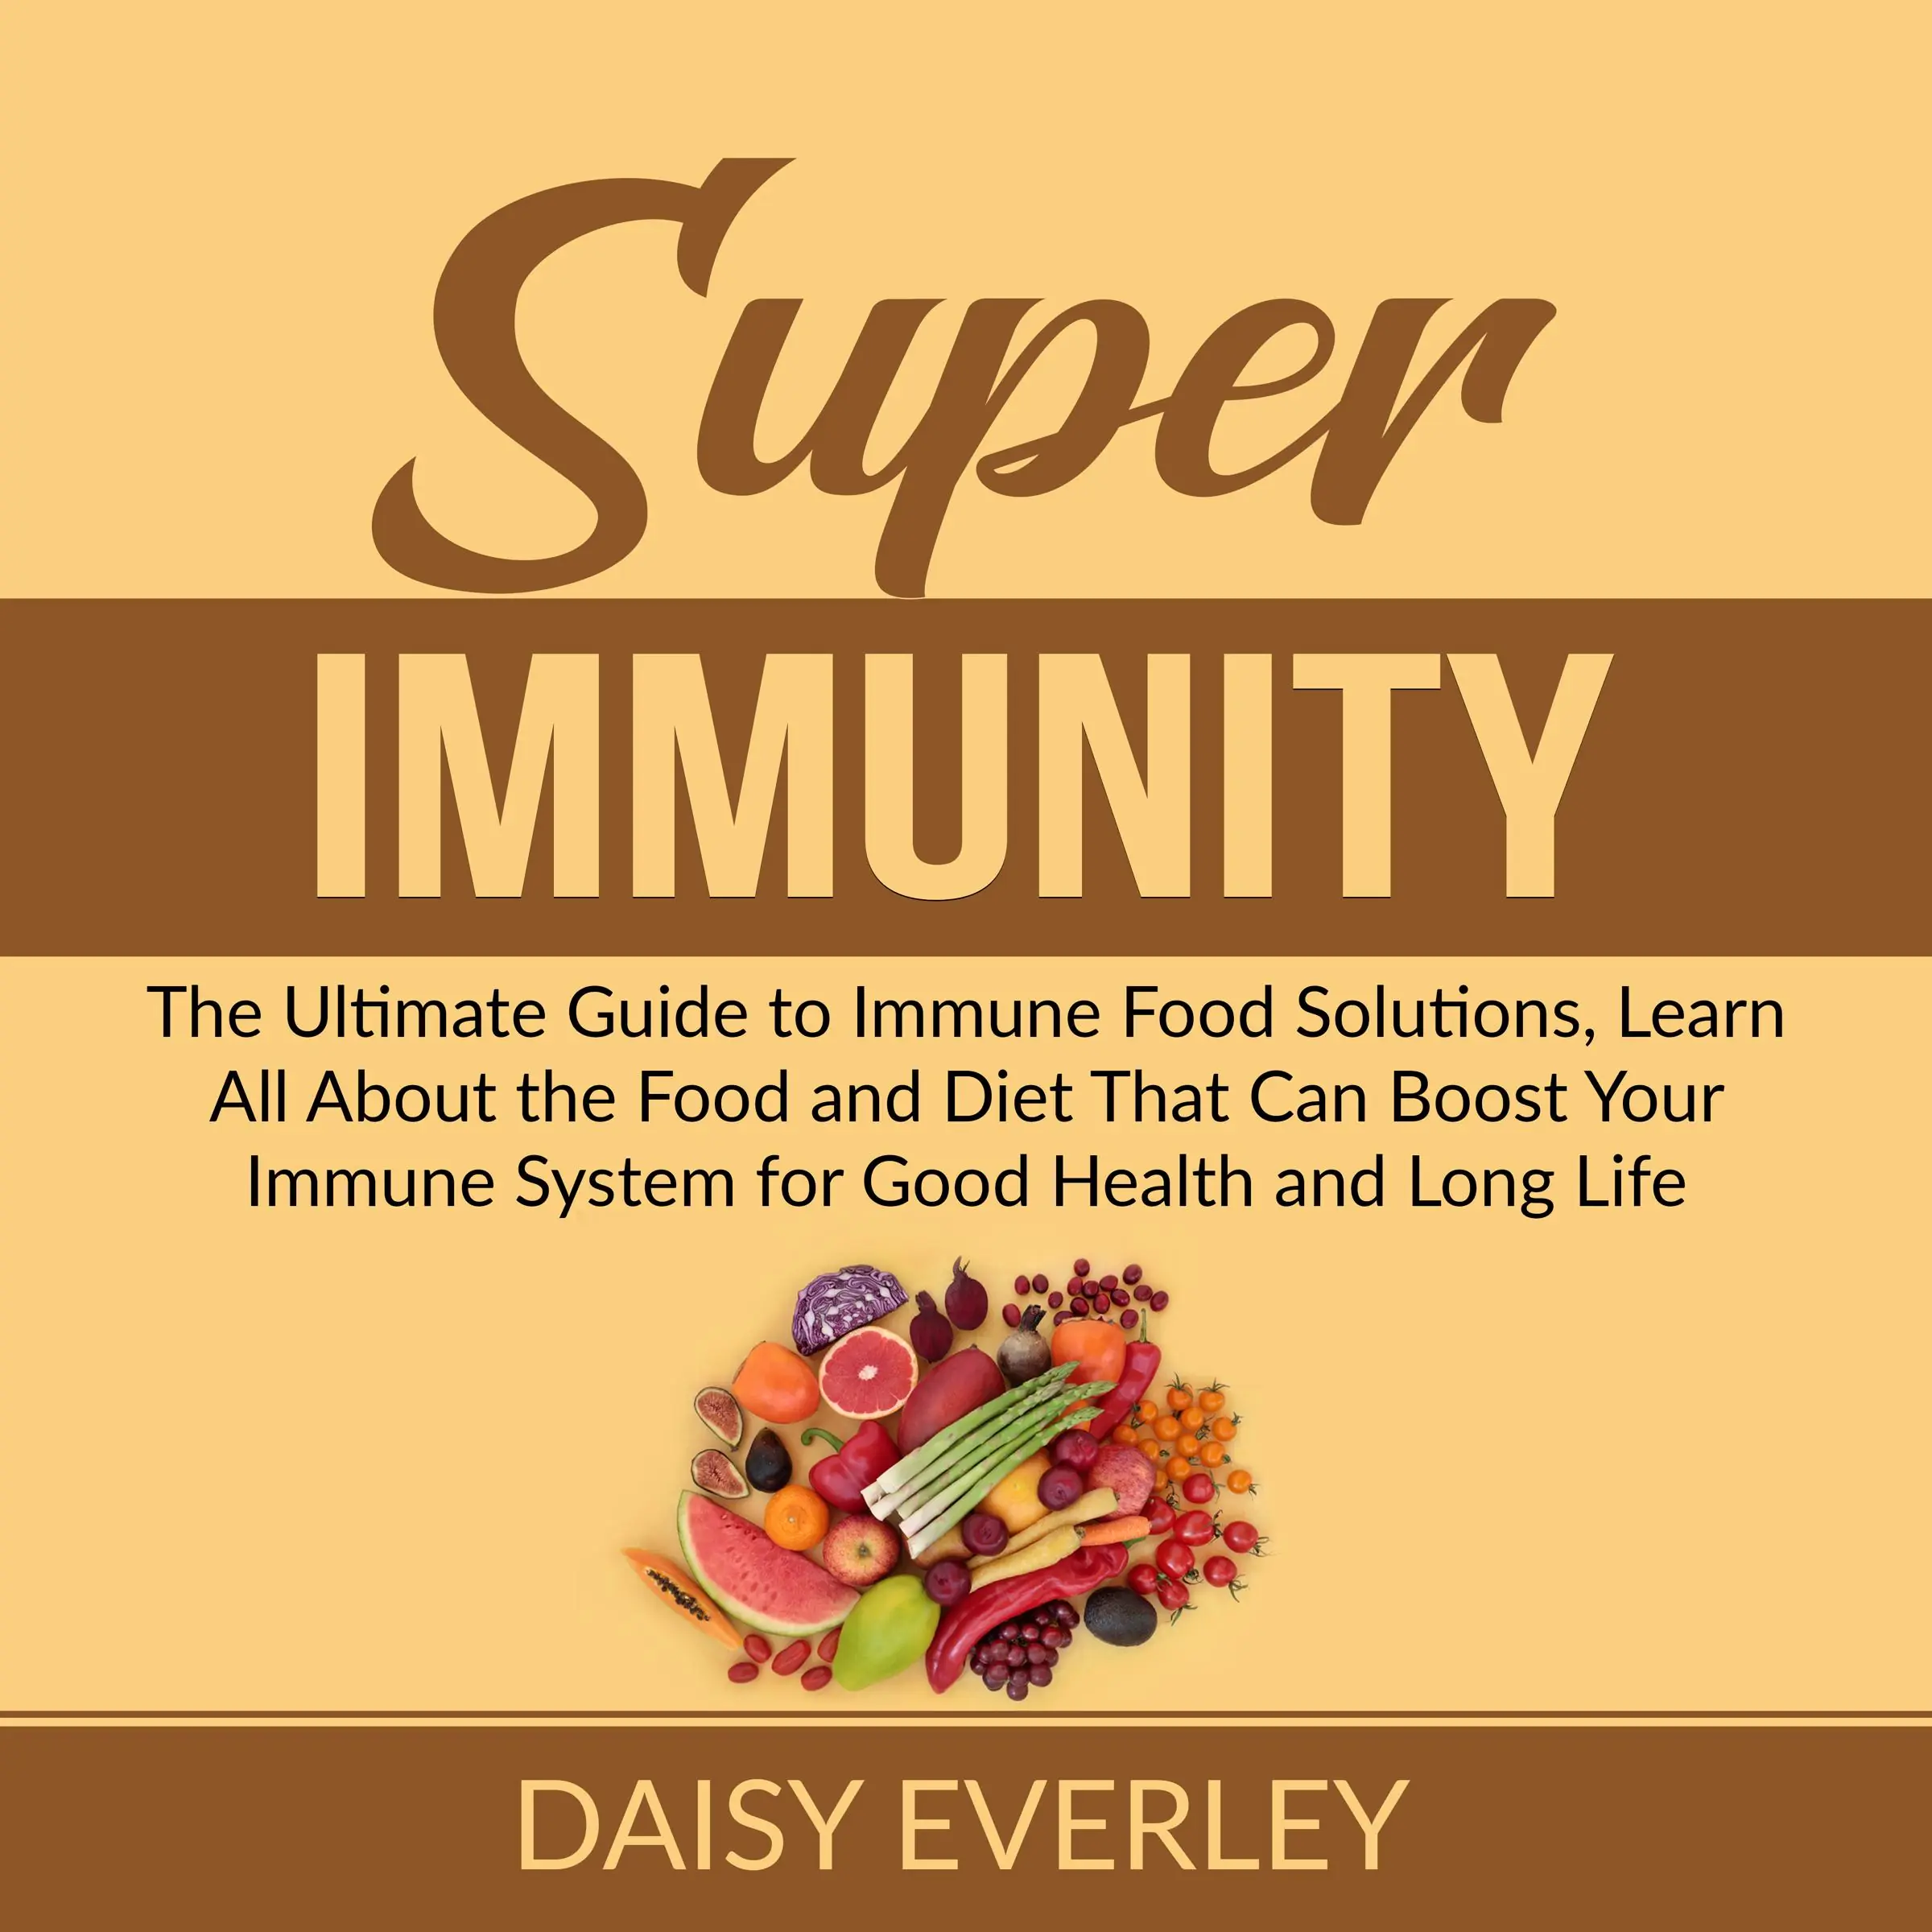 Super Immunity: The Ultimate Guide to Immune Food Solutions, Learn All About the Food and Diet That Can Boost Your Immune System for Good Health and Long Life Audiobook by Daisy Everley